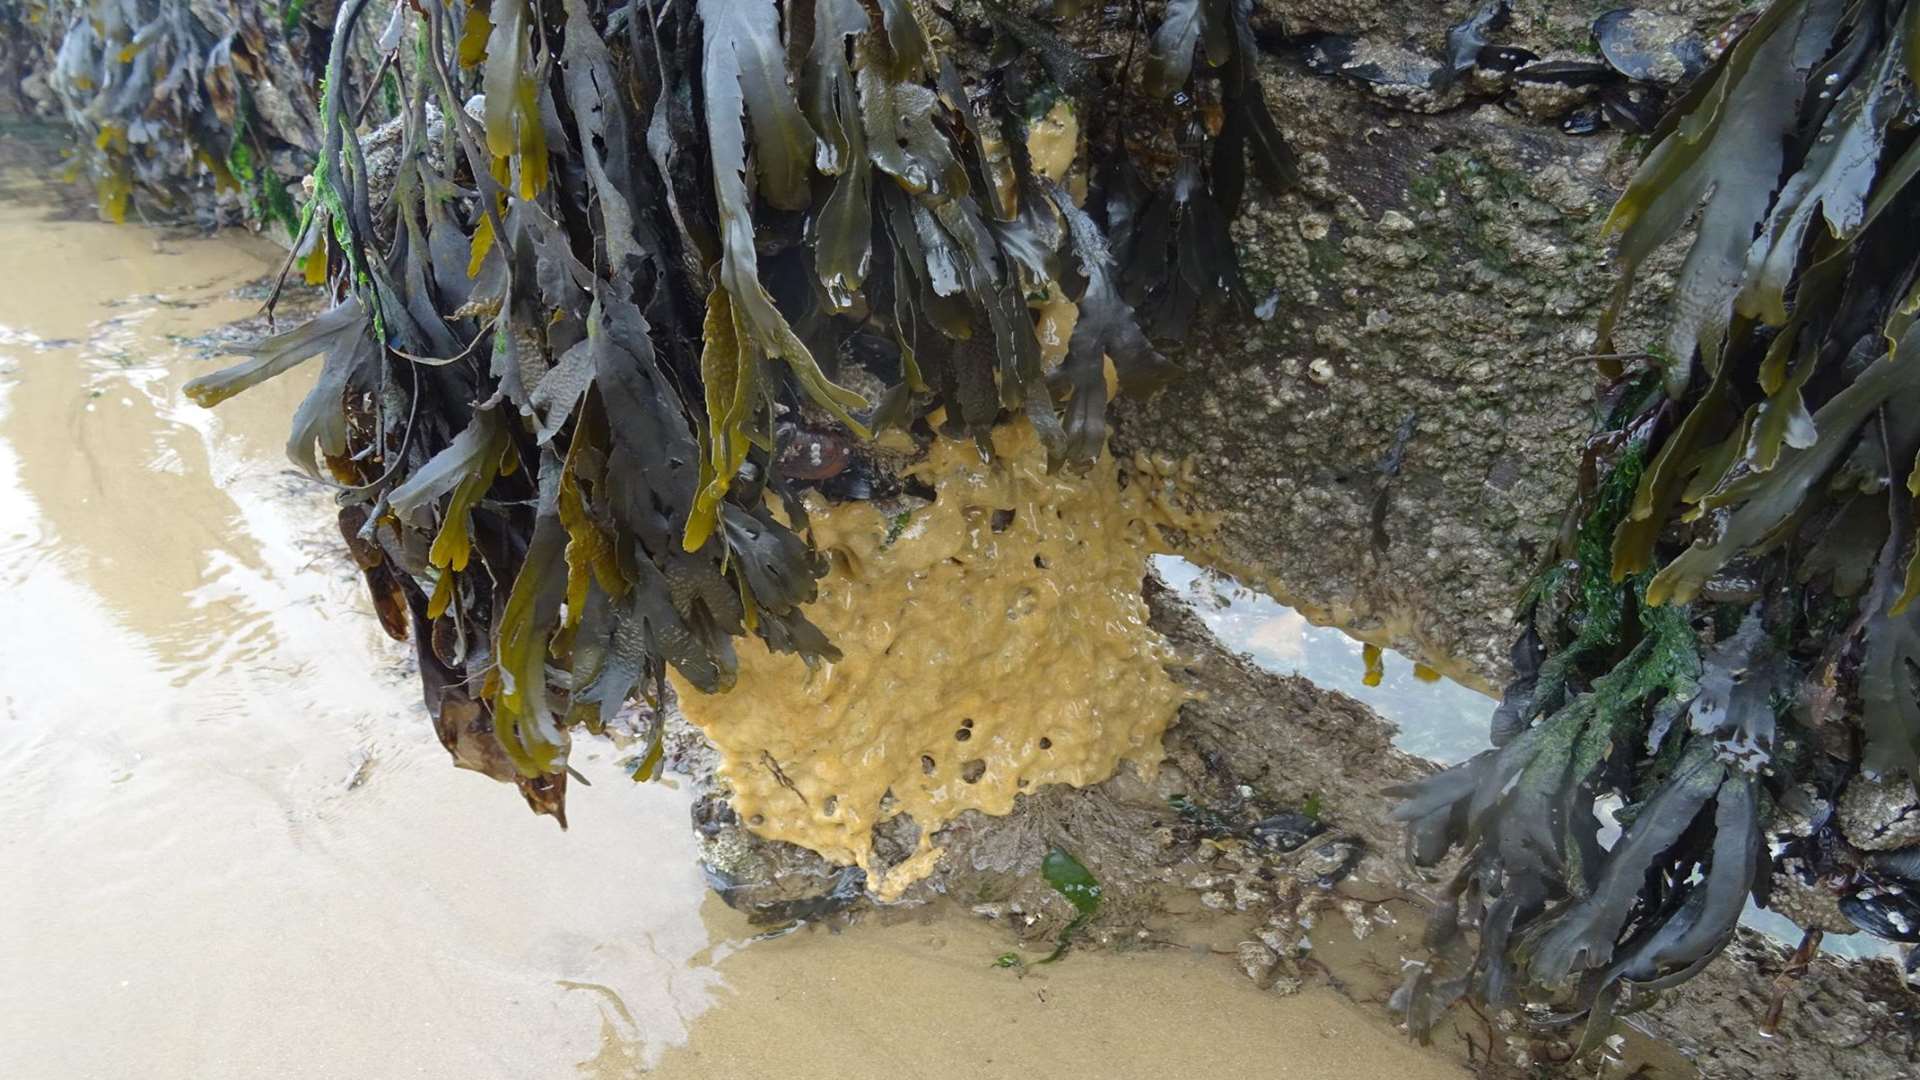 Deadly palm oil has been found at Herne Bay beach.